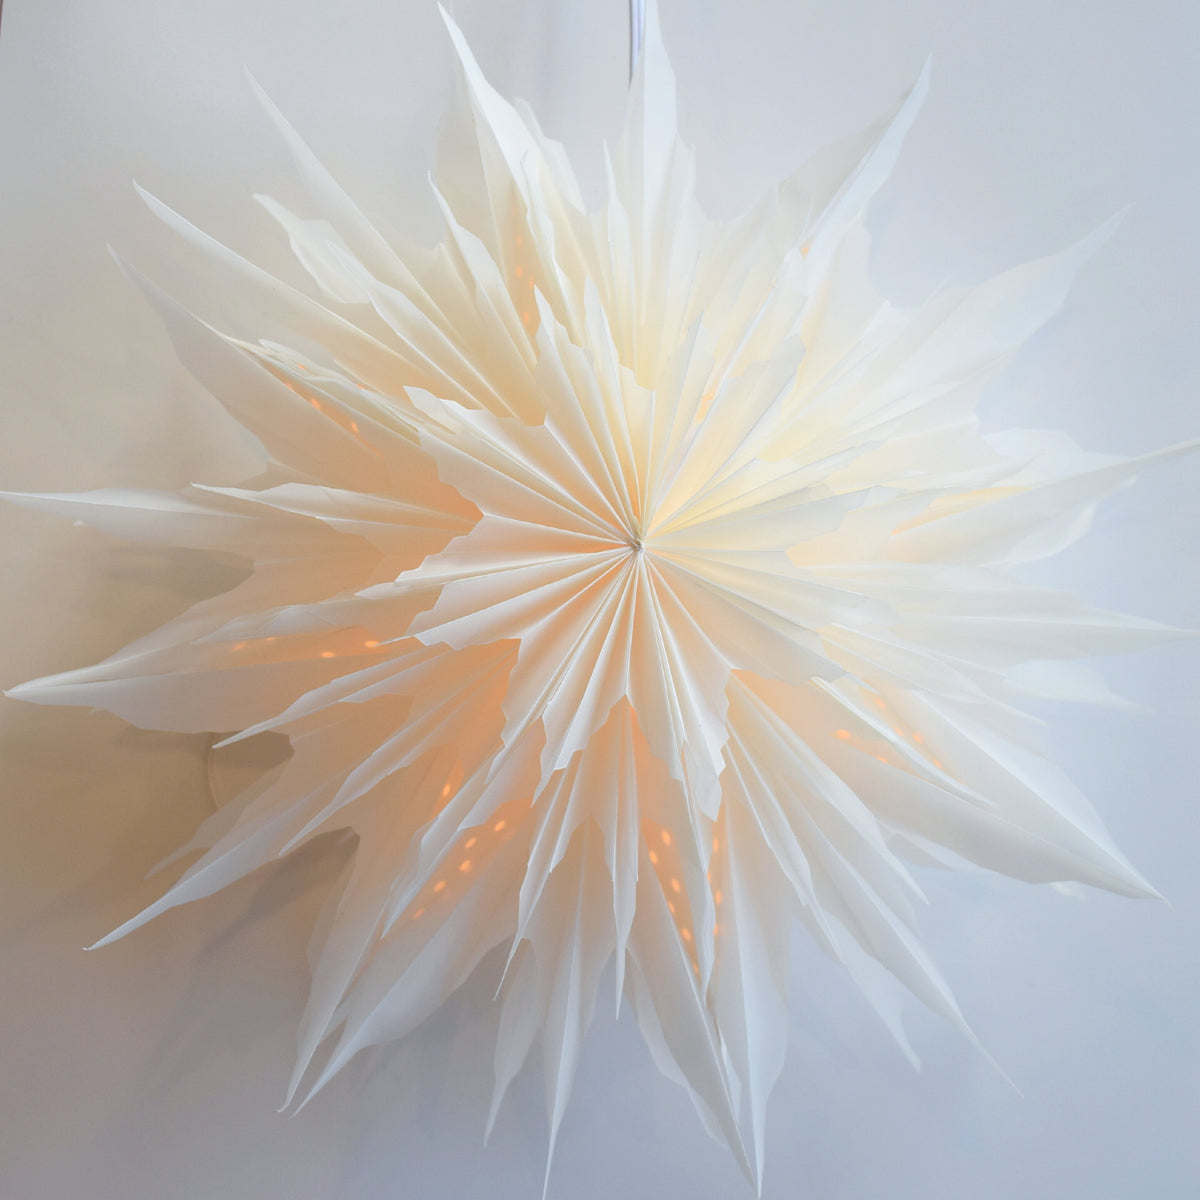 17&quot; White Snowdrift Snowflake Star Lantern Pizzelle Design - Great With or Without Lights - Ideal for Holiday and Snowflake Decorations, Weddings, Parties, and Home Decor